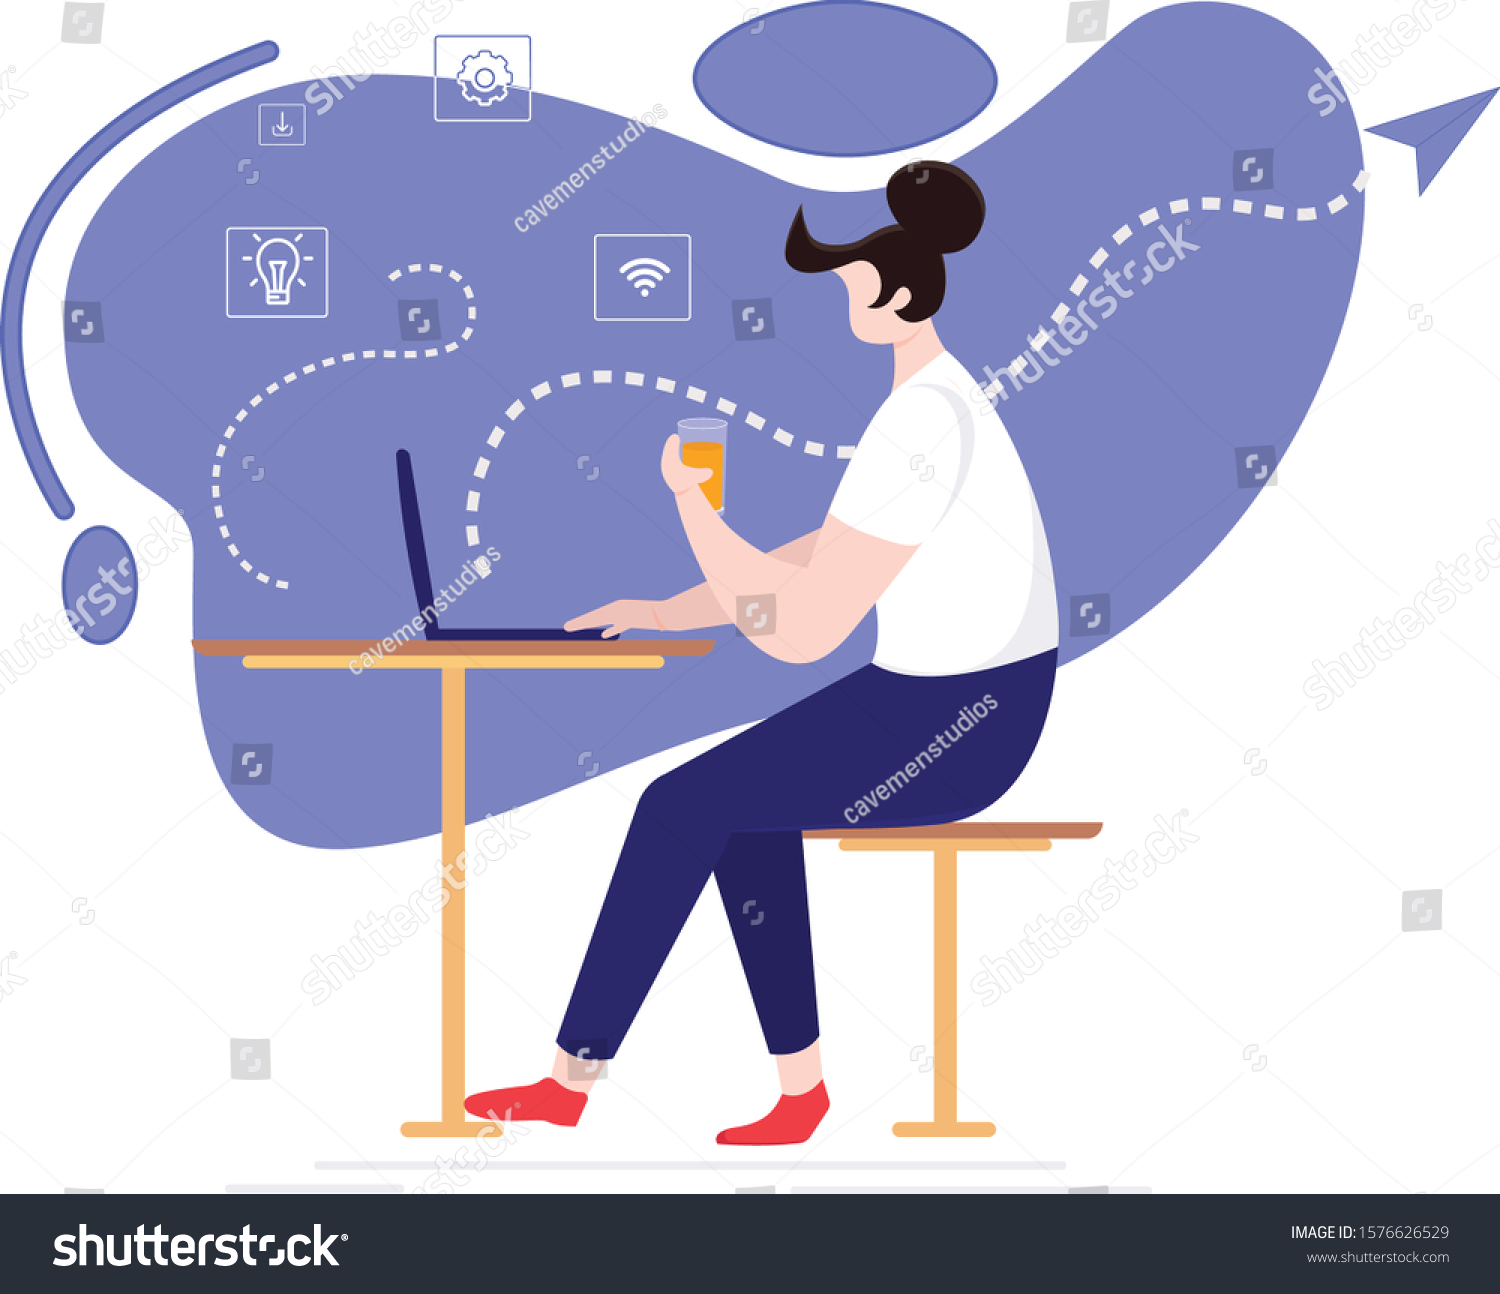 332 Technology savvy Stock Illustrations, Images & Vectors | Shutterstock